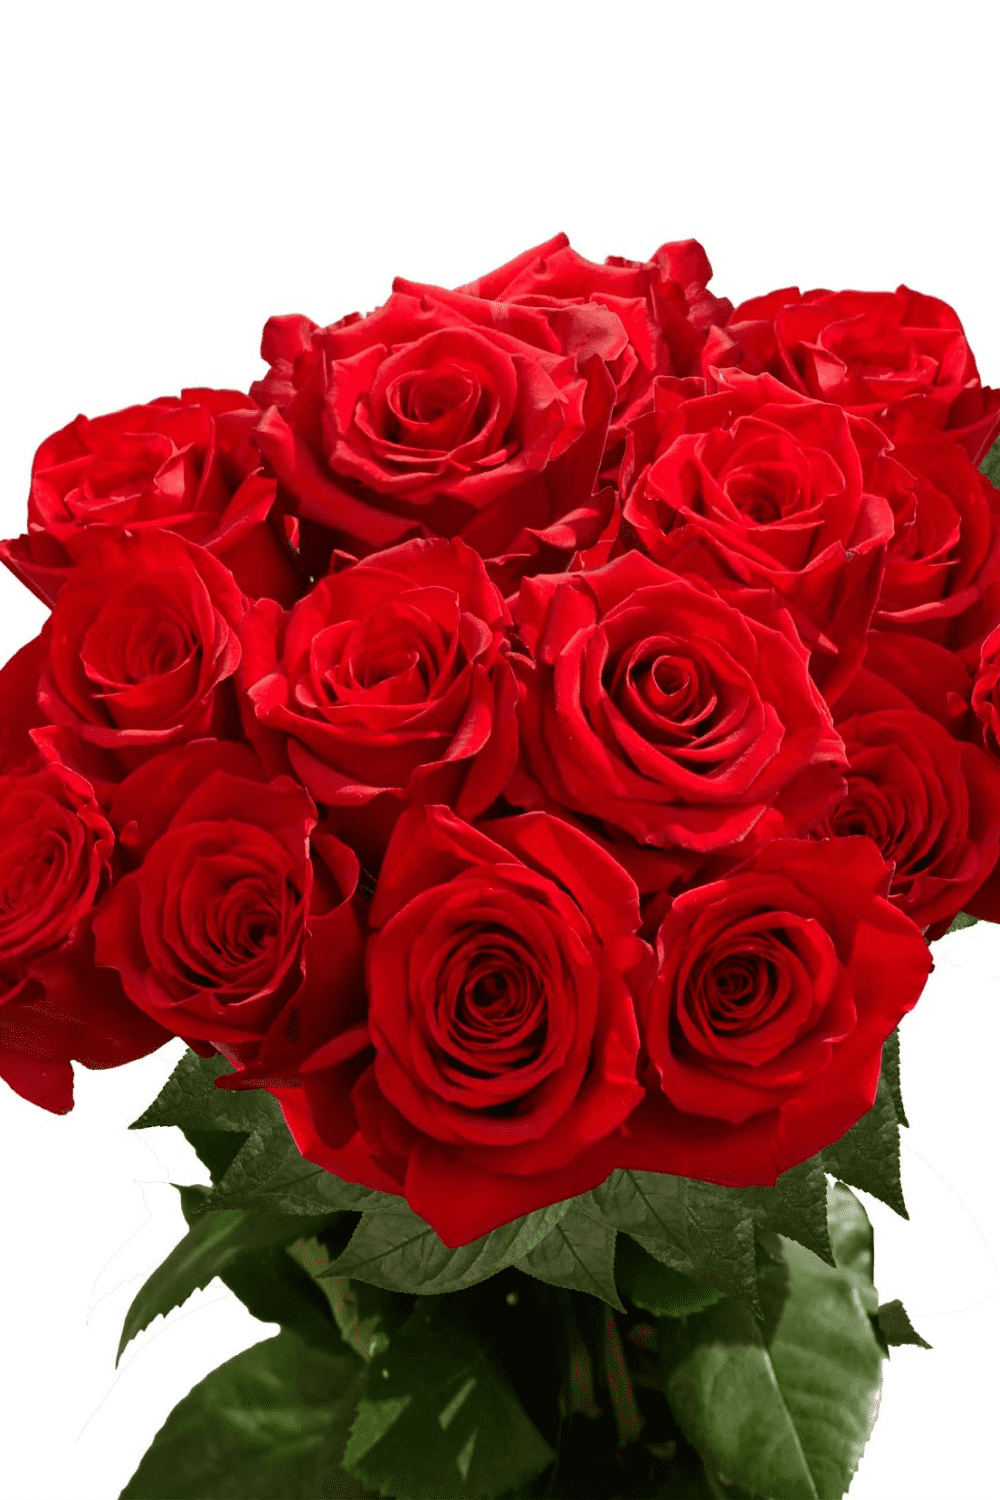 Photo of the red roses.